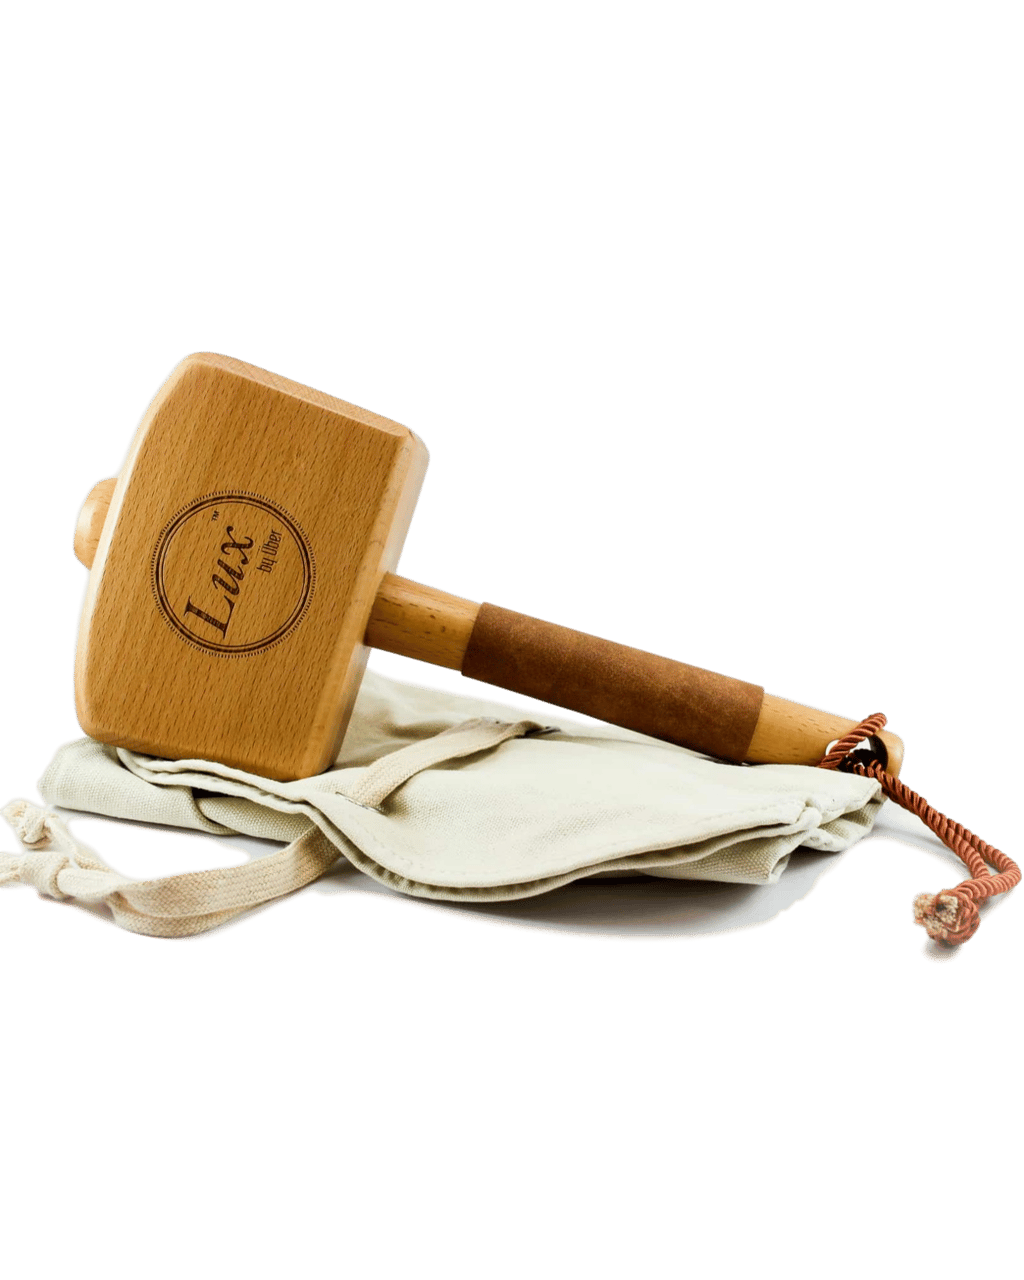 Lewis Bag & Ice Mallet - Manual Ice Crusher Wooden Hammer -  Canvas Crushing Bag - Crushed Ice Bar Cocktails - Bartender & Kitchen Tools  Kit by Eparé: Ice Crushers